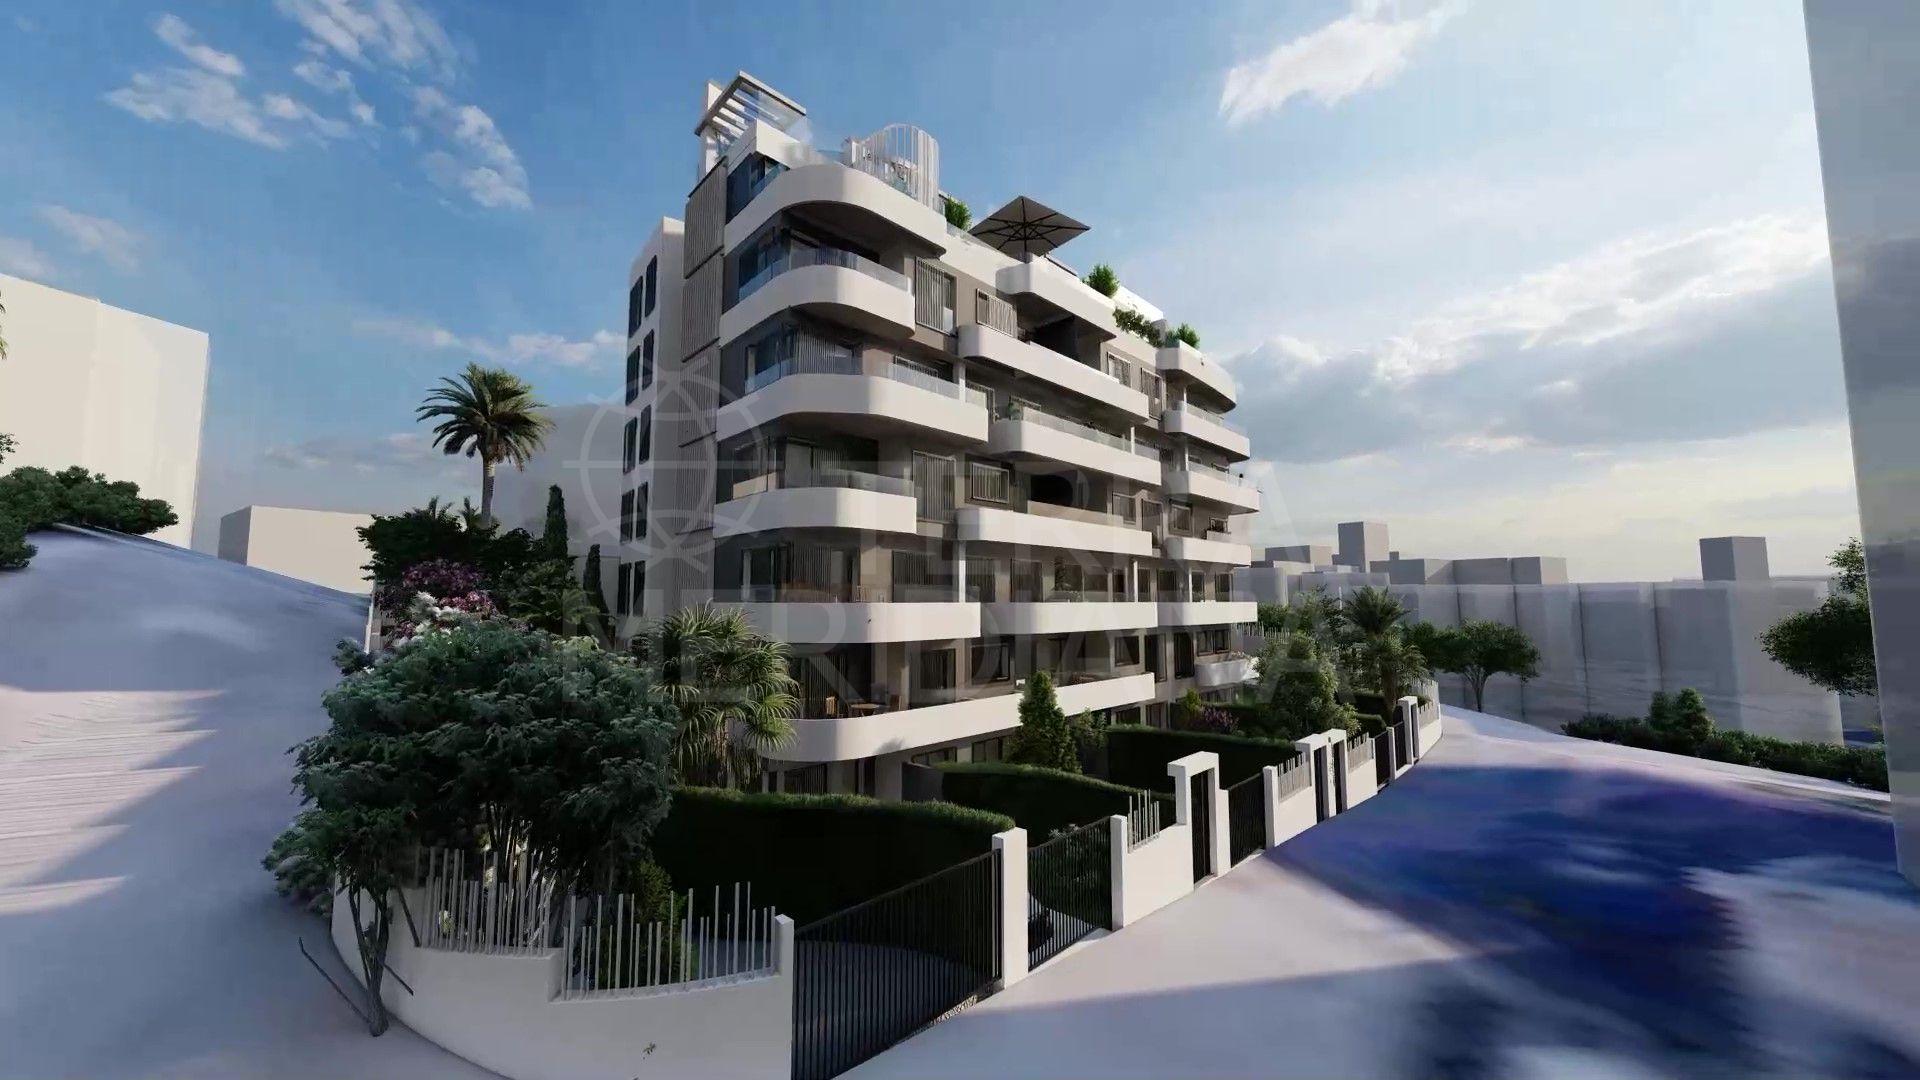 Lovely brand new ground floor apartment with garden in the centre of town for sale in Estepona Plaza